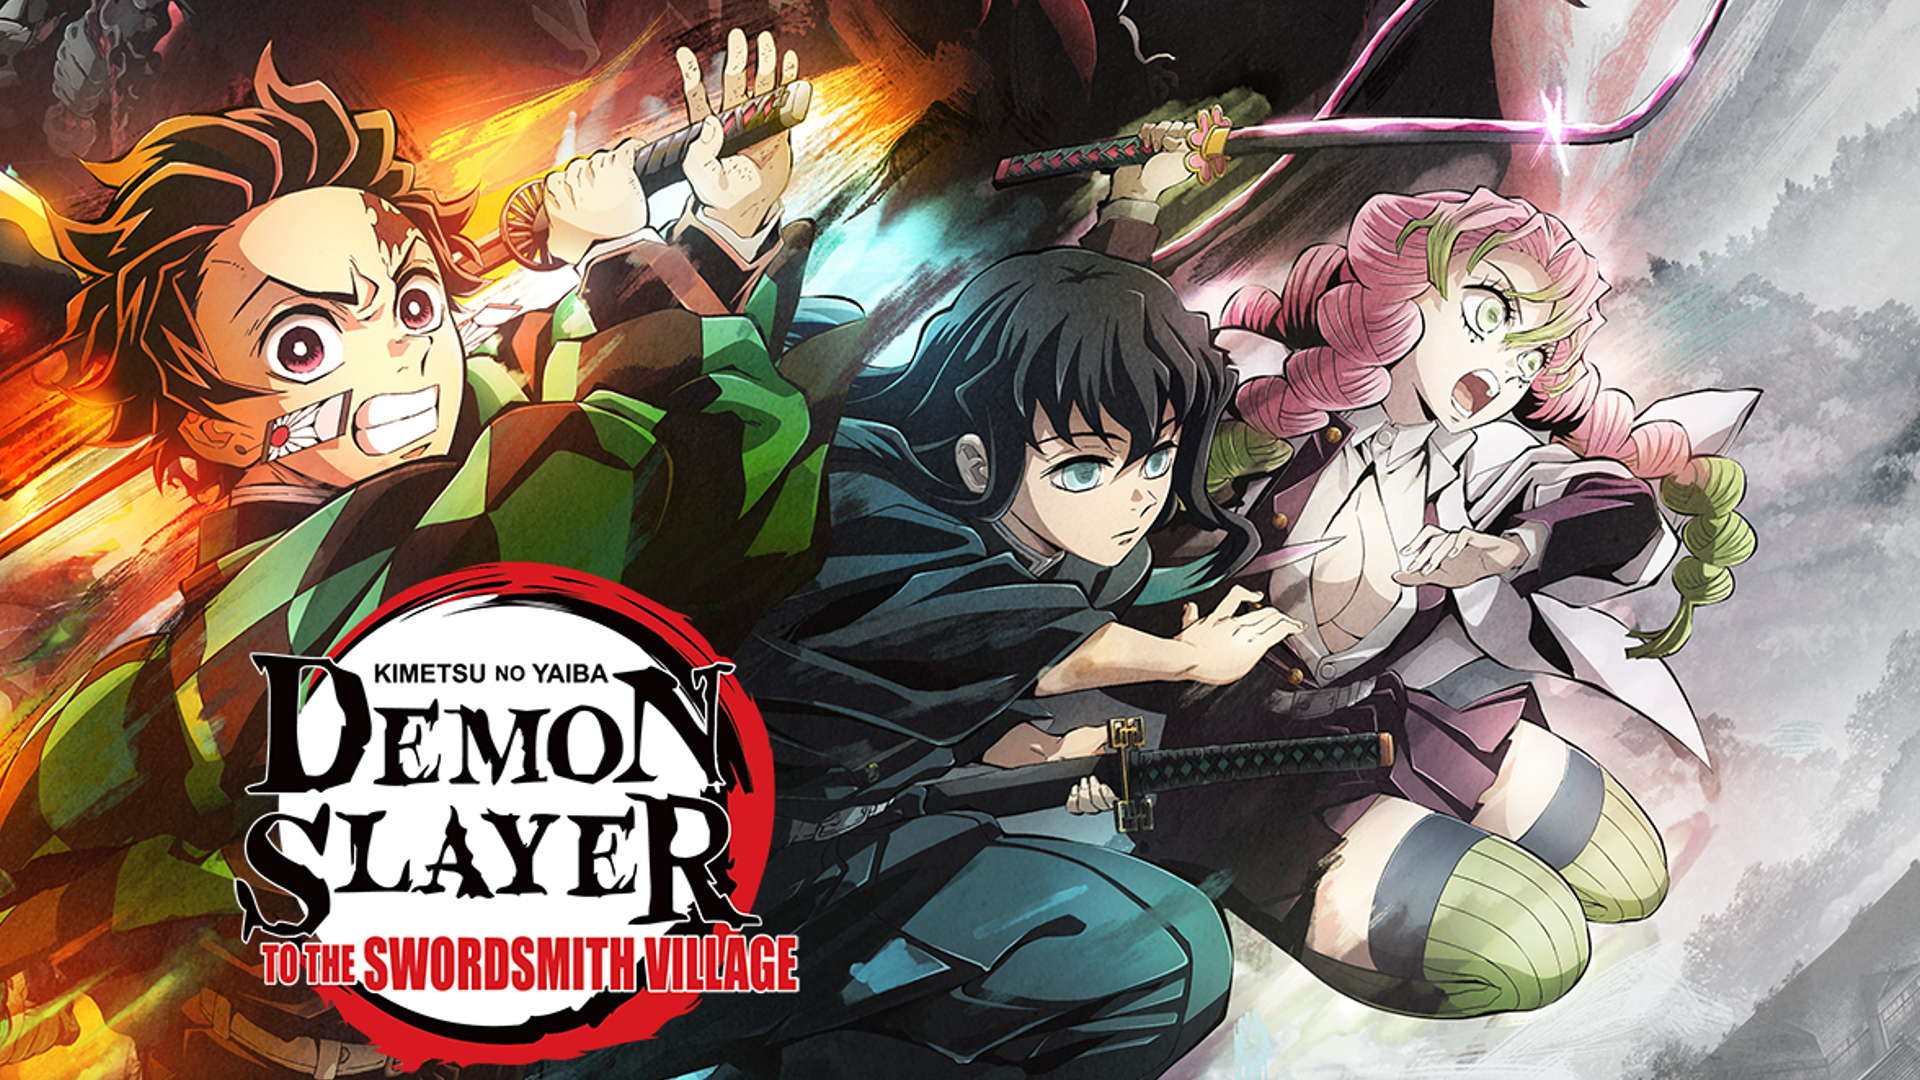 Demon Slayer' Season 4 Coming to Netflix in September 2023 - What's on  Netflix